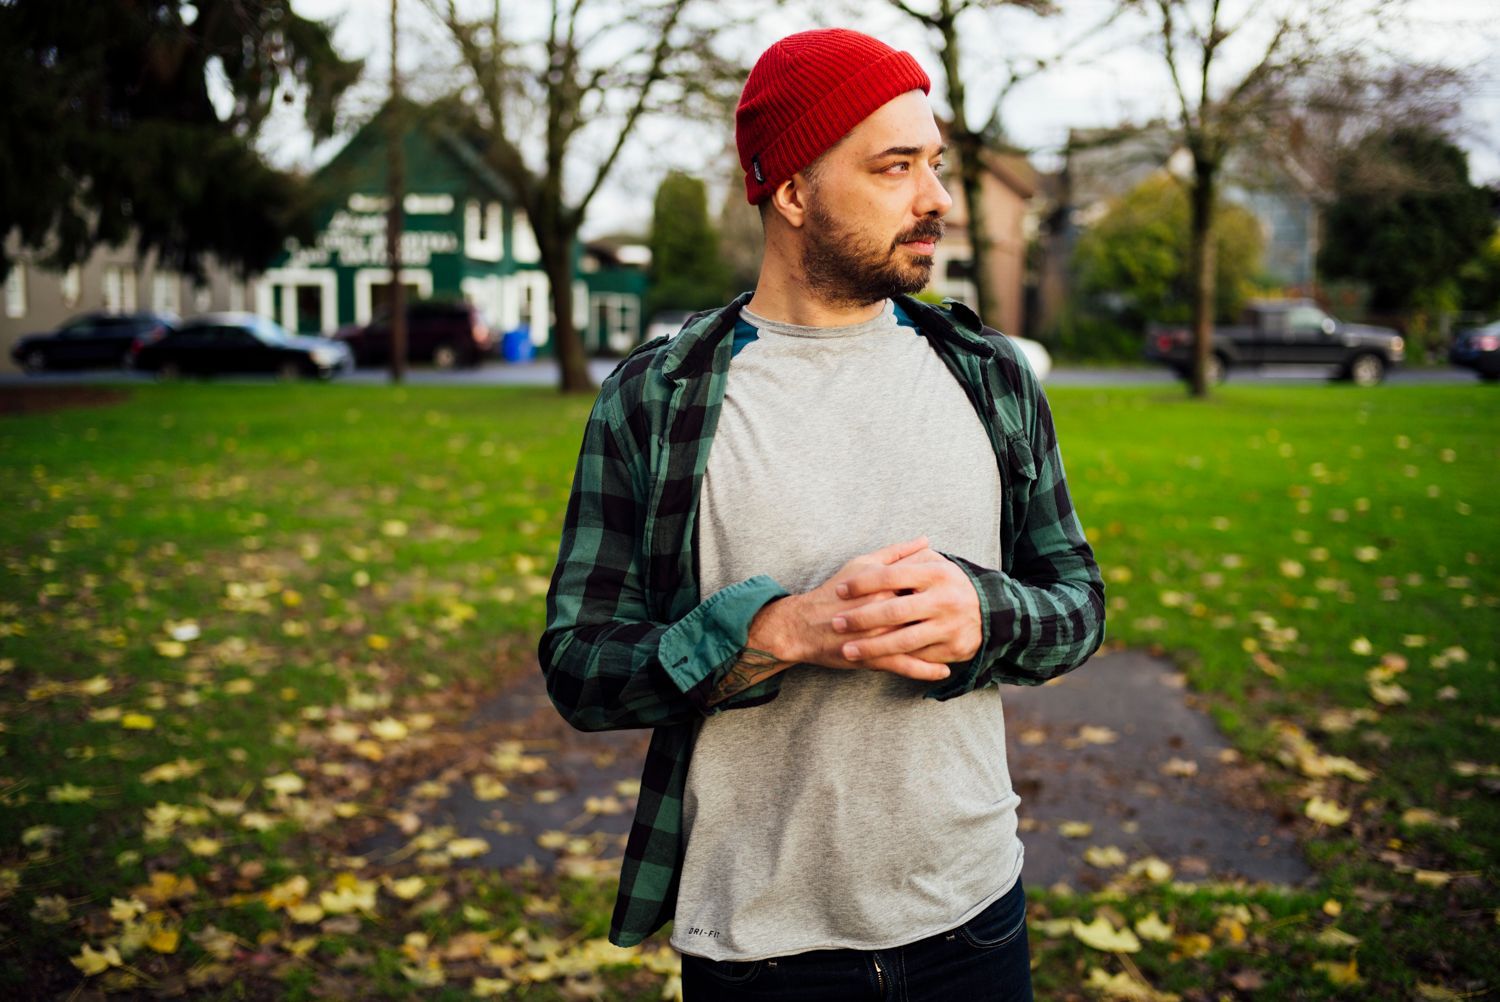 Aesop Rock Announces the North American “Hey Kirby Tour”